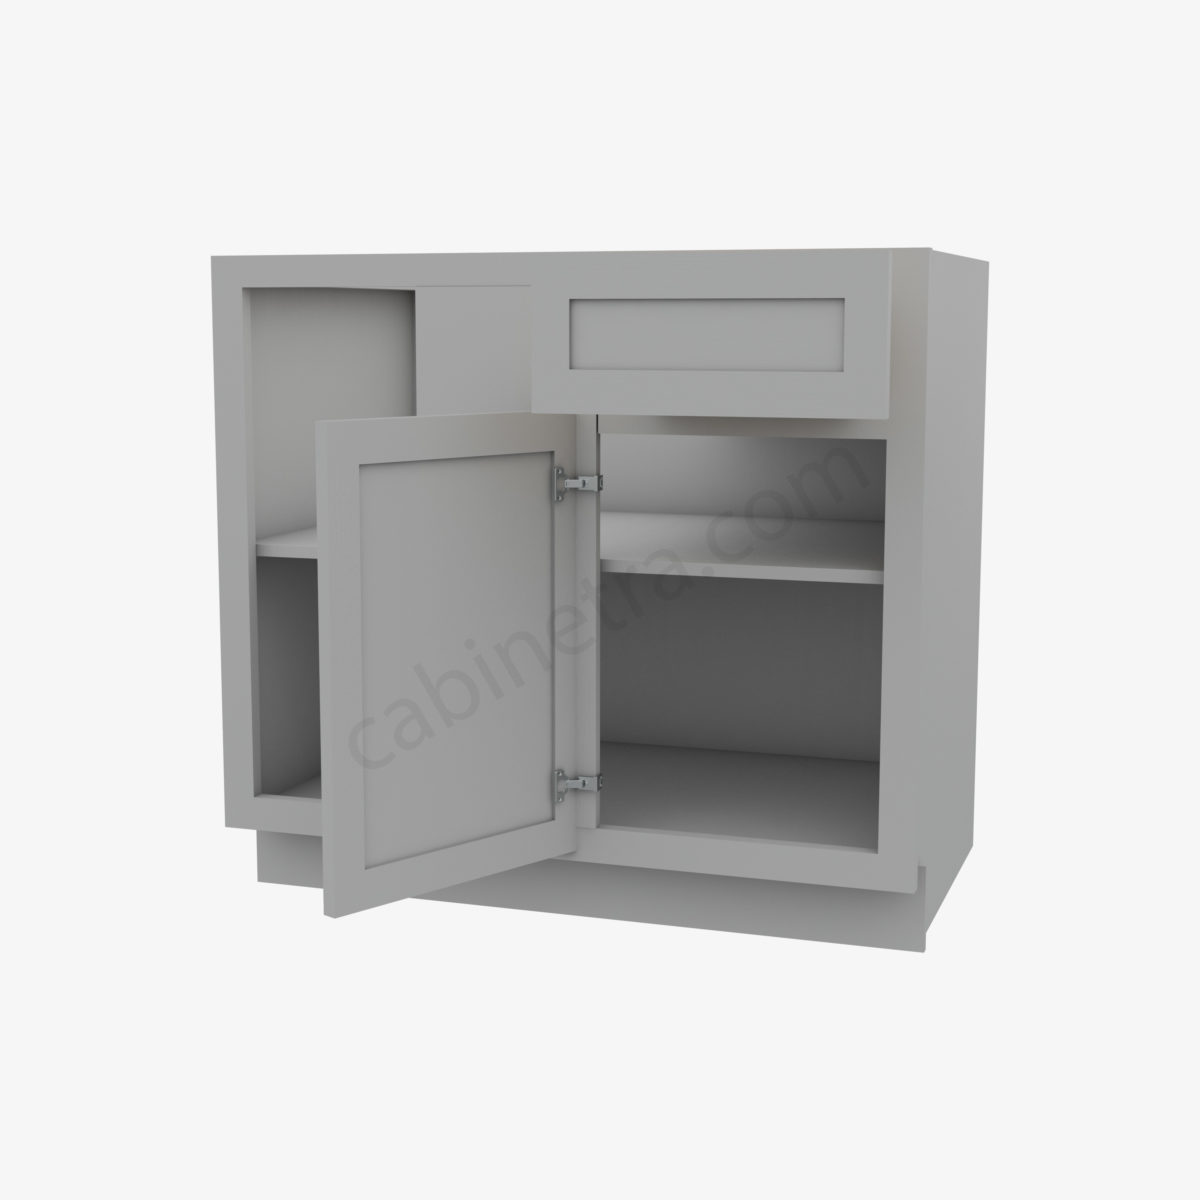 AB BBLC39 42 36W 5 Forevermark Lait Gray Shaker Cabinetra scaled